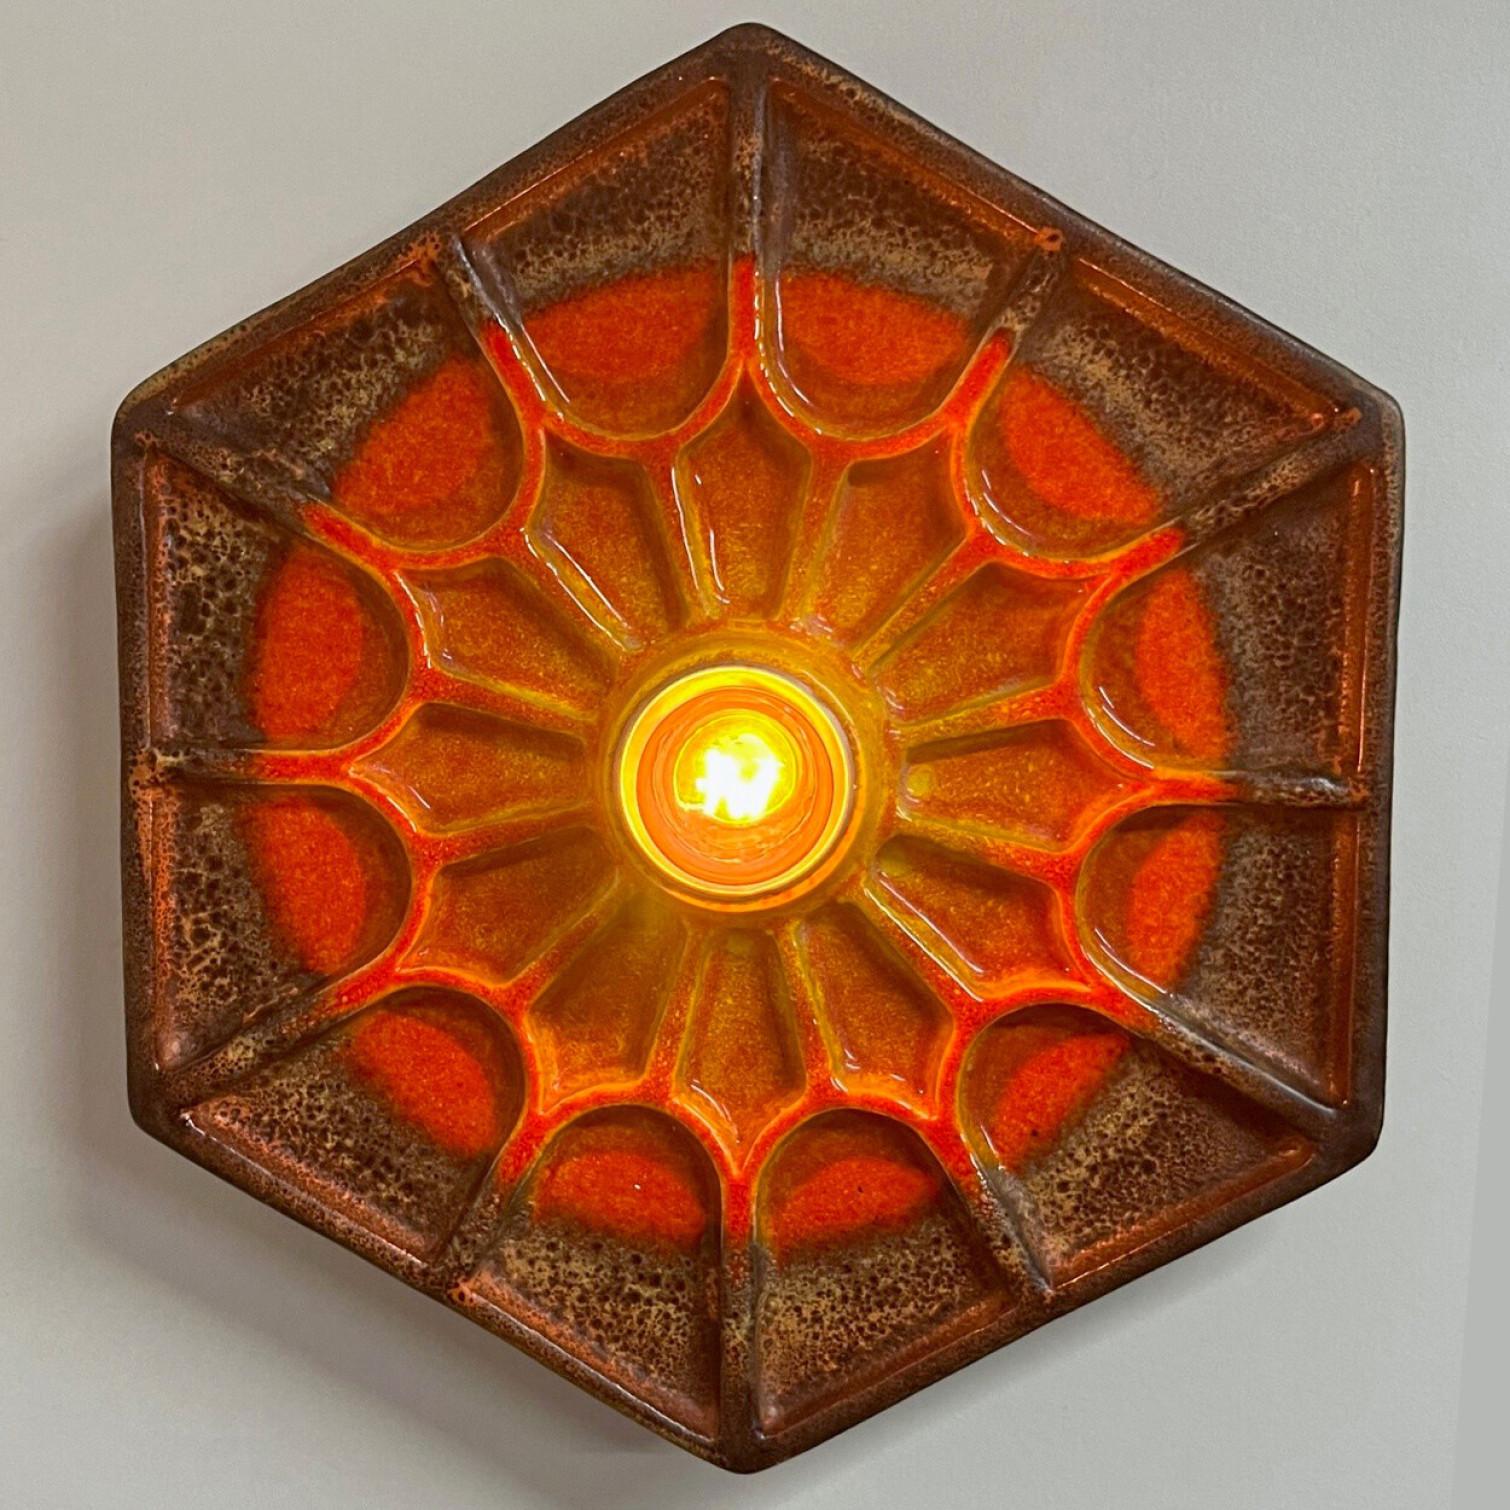 Space Age Pair of Orange Hex-shaped Ceramic Wall Lights, Germany, 1970 For Sale